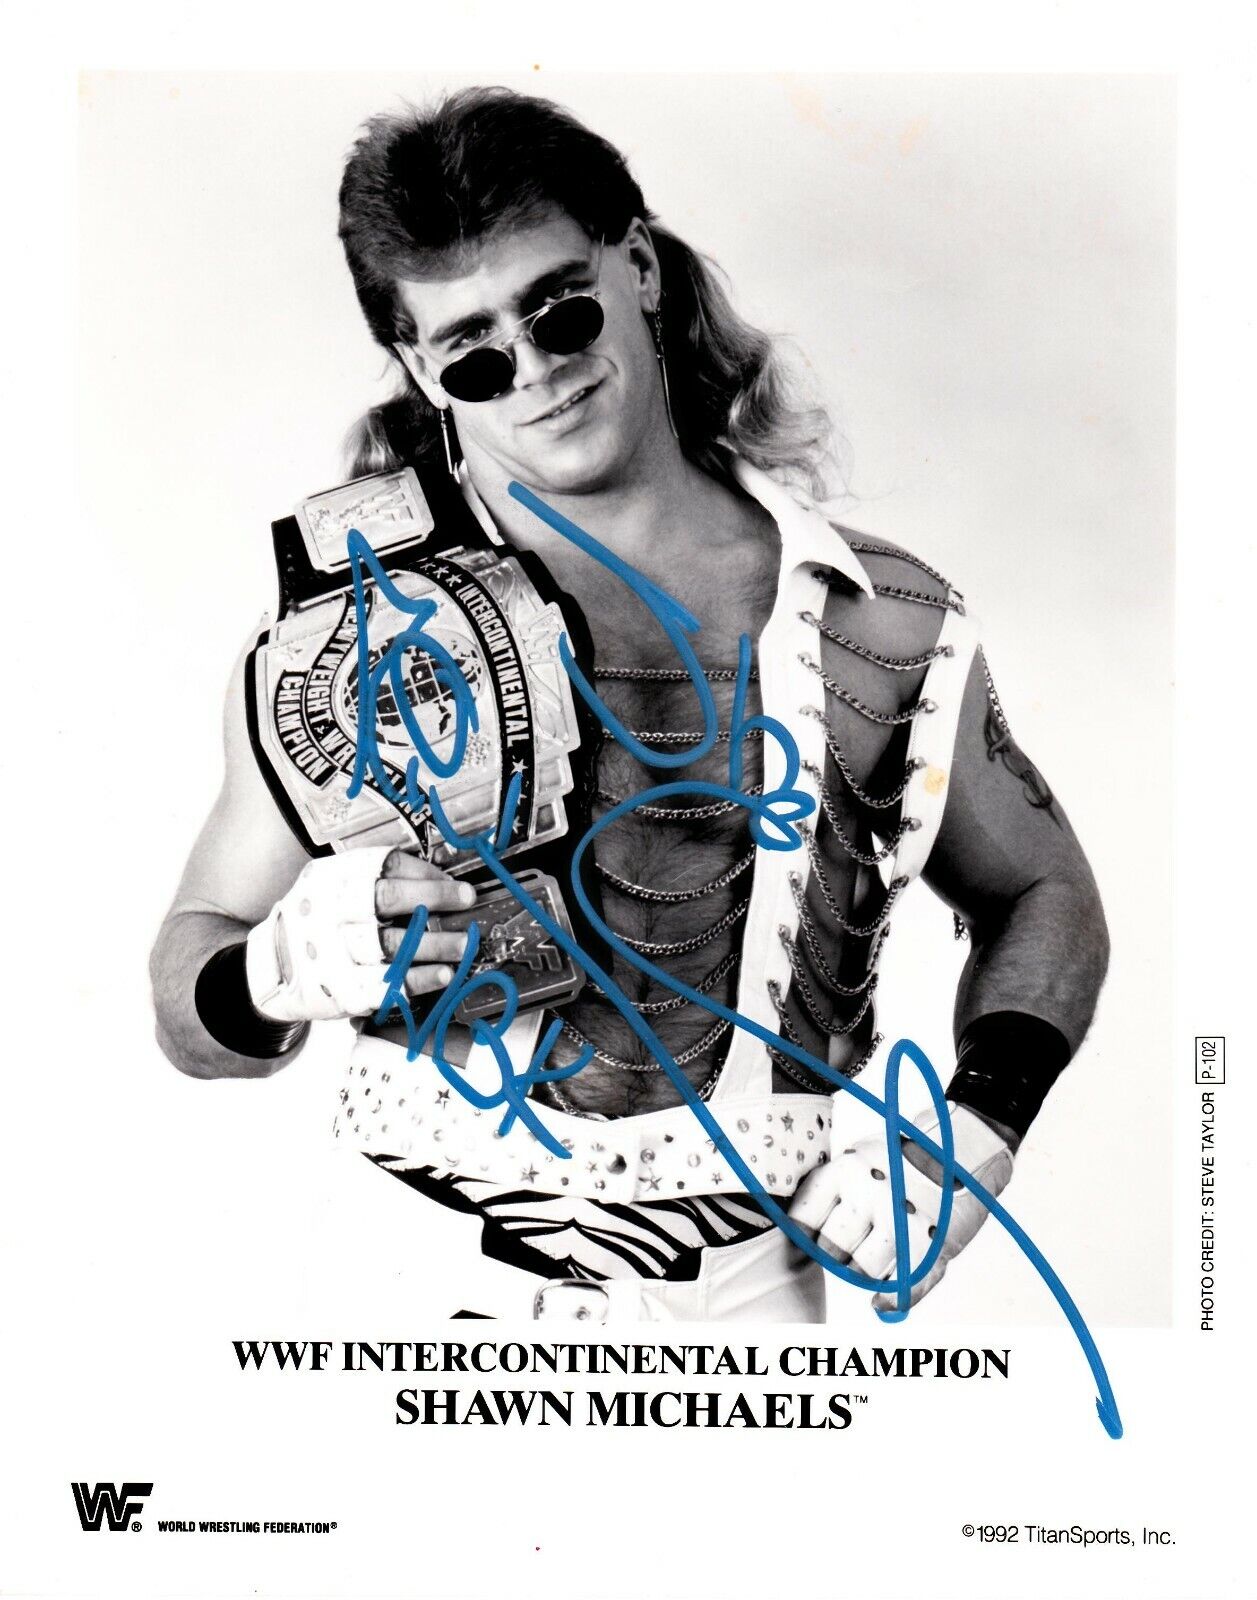 Shawn Michael's WWF / WWE Wrestler 8 x 10 Autographed Photo Poster painting *Must Have** (RP 4)